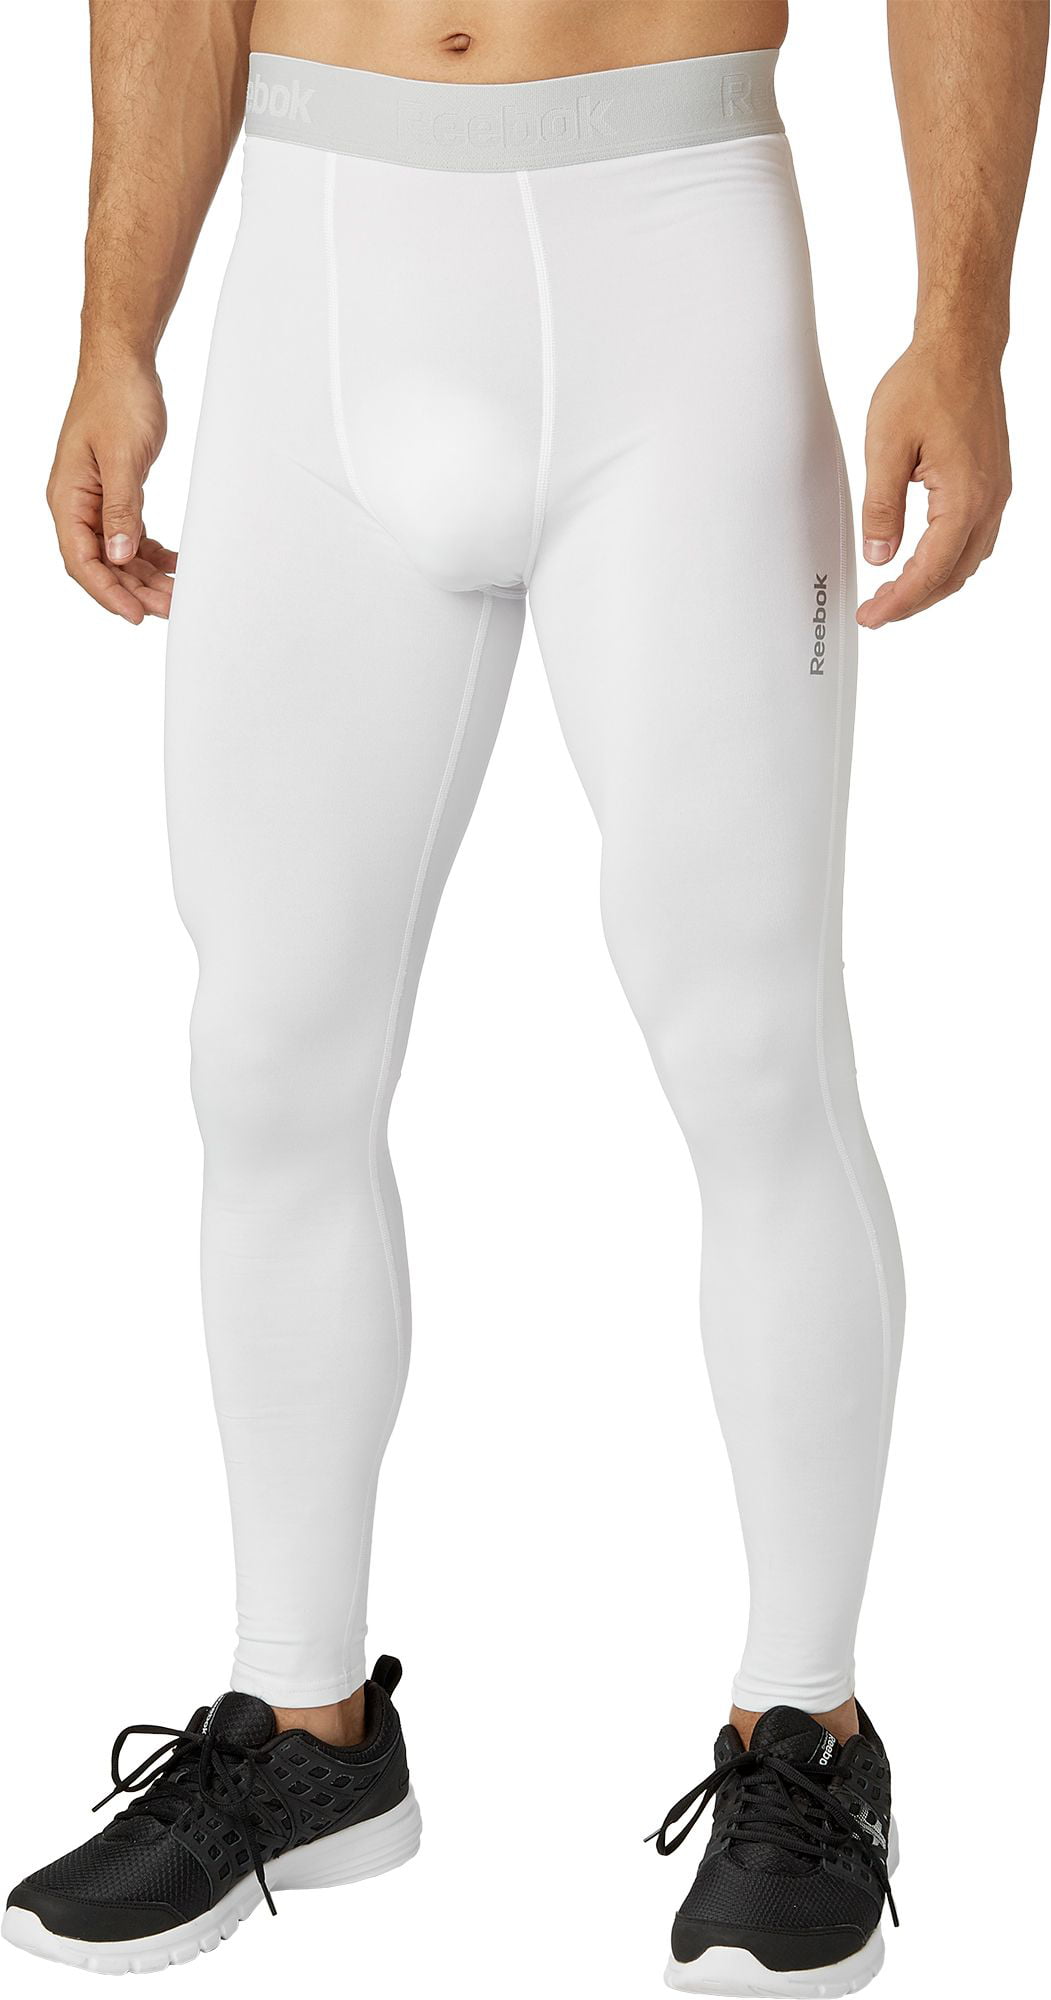 reebok men's cold weather compression tights